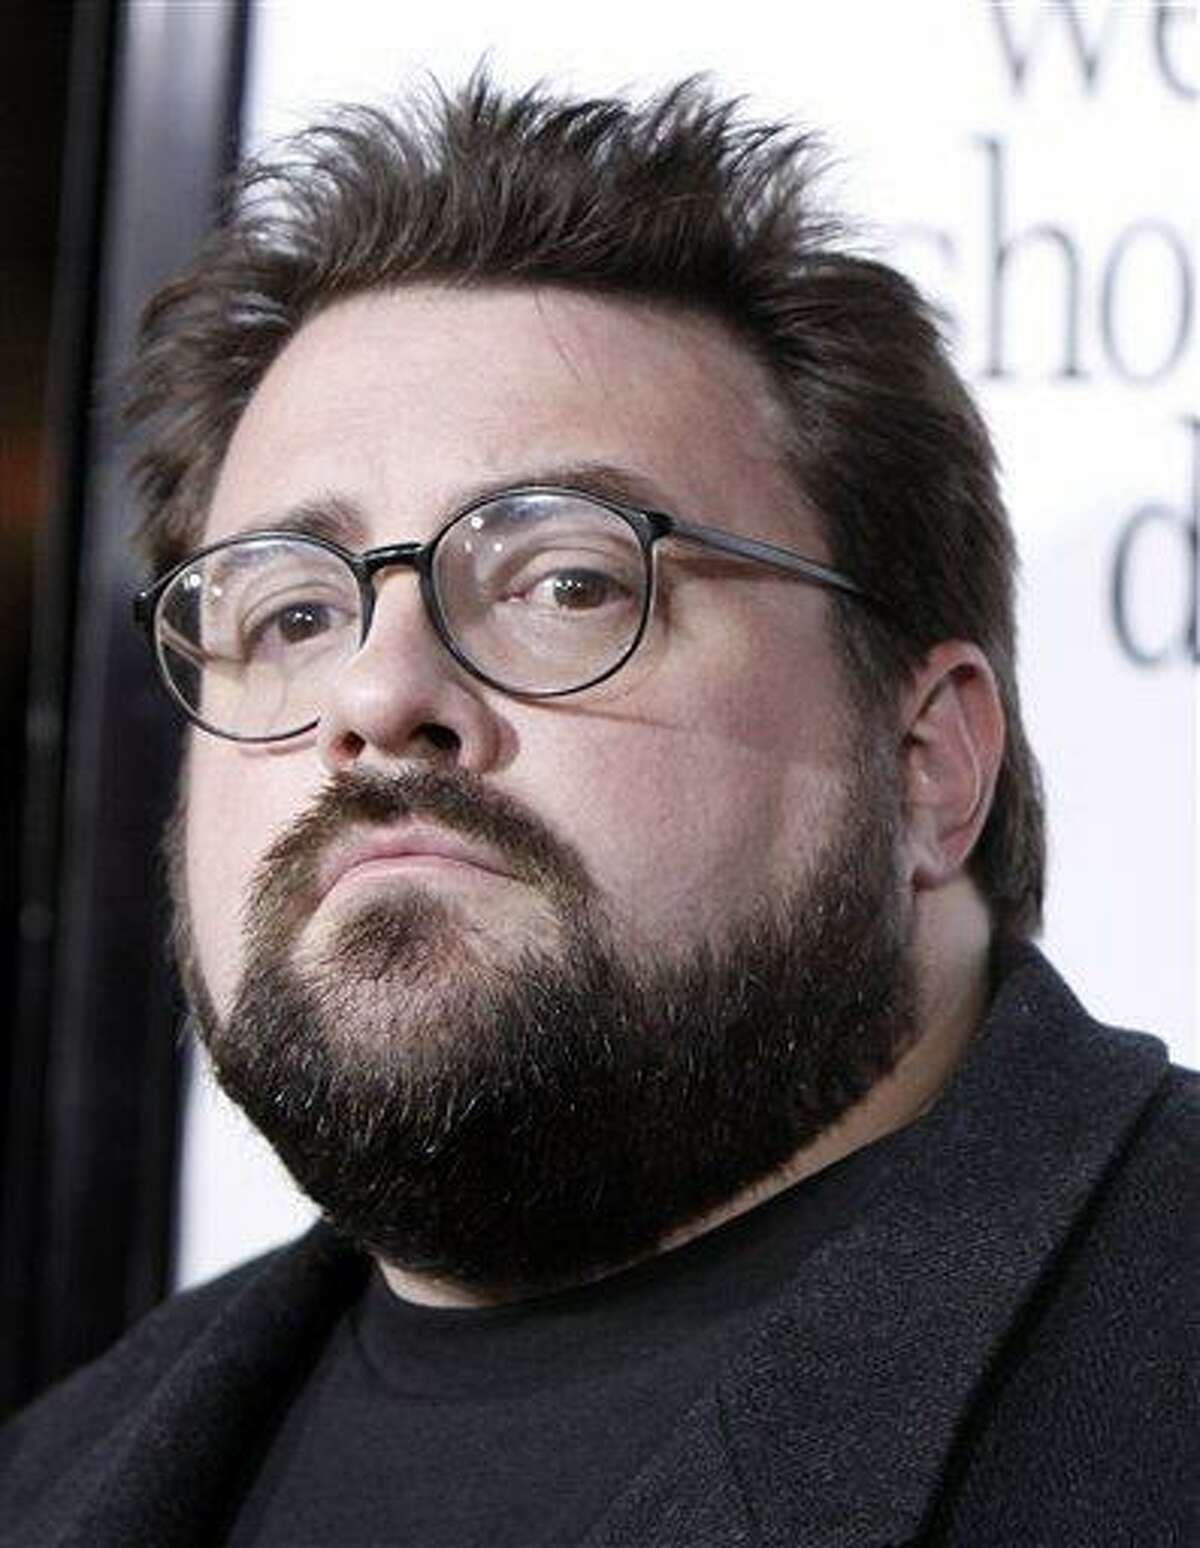 FILE - In this Oct. 20, 2008 file photo Kevin Smith arrives at the premiere of "Zach and Miri Make A Porno" in Los Angeles. (AP Photo/Matt Sayles, File)